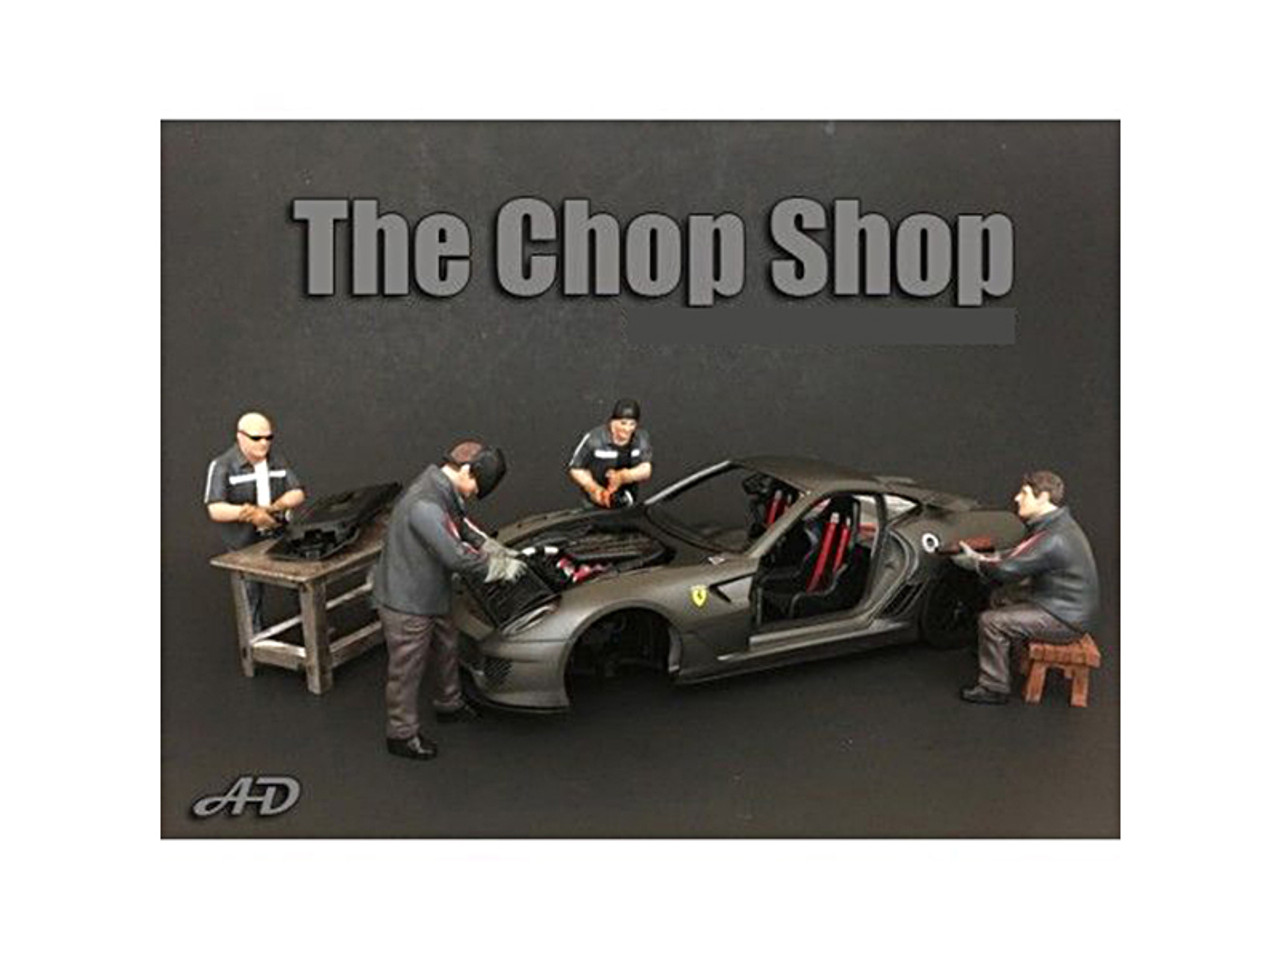 "Chop Shop" 4 piece Figurine Set for 1/24 Scale Models by American Diorama